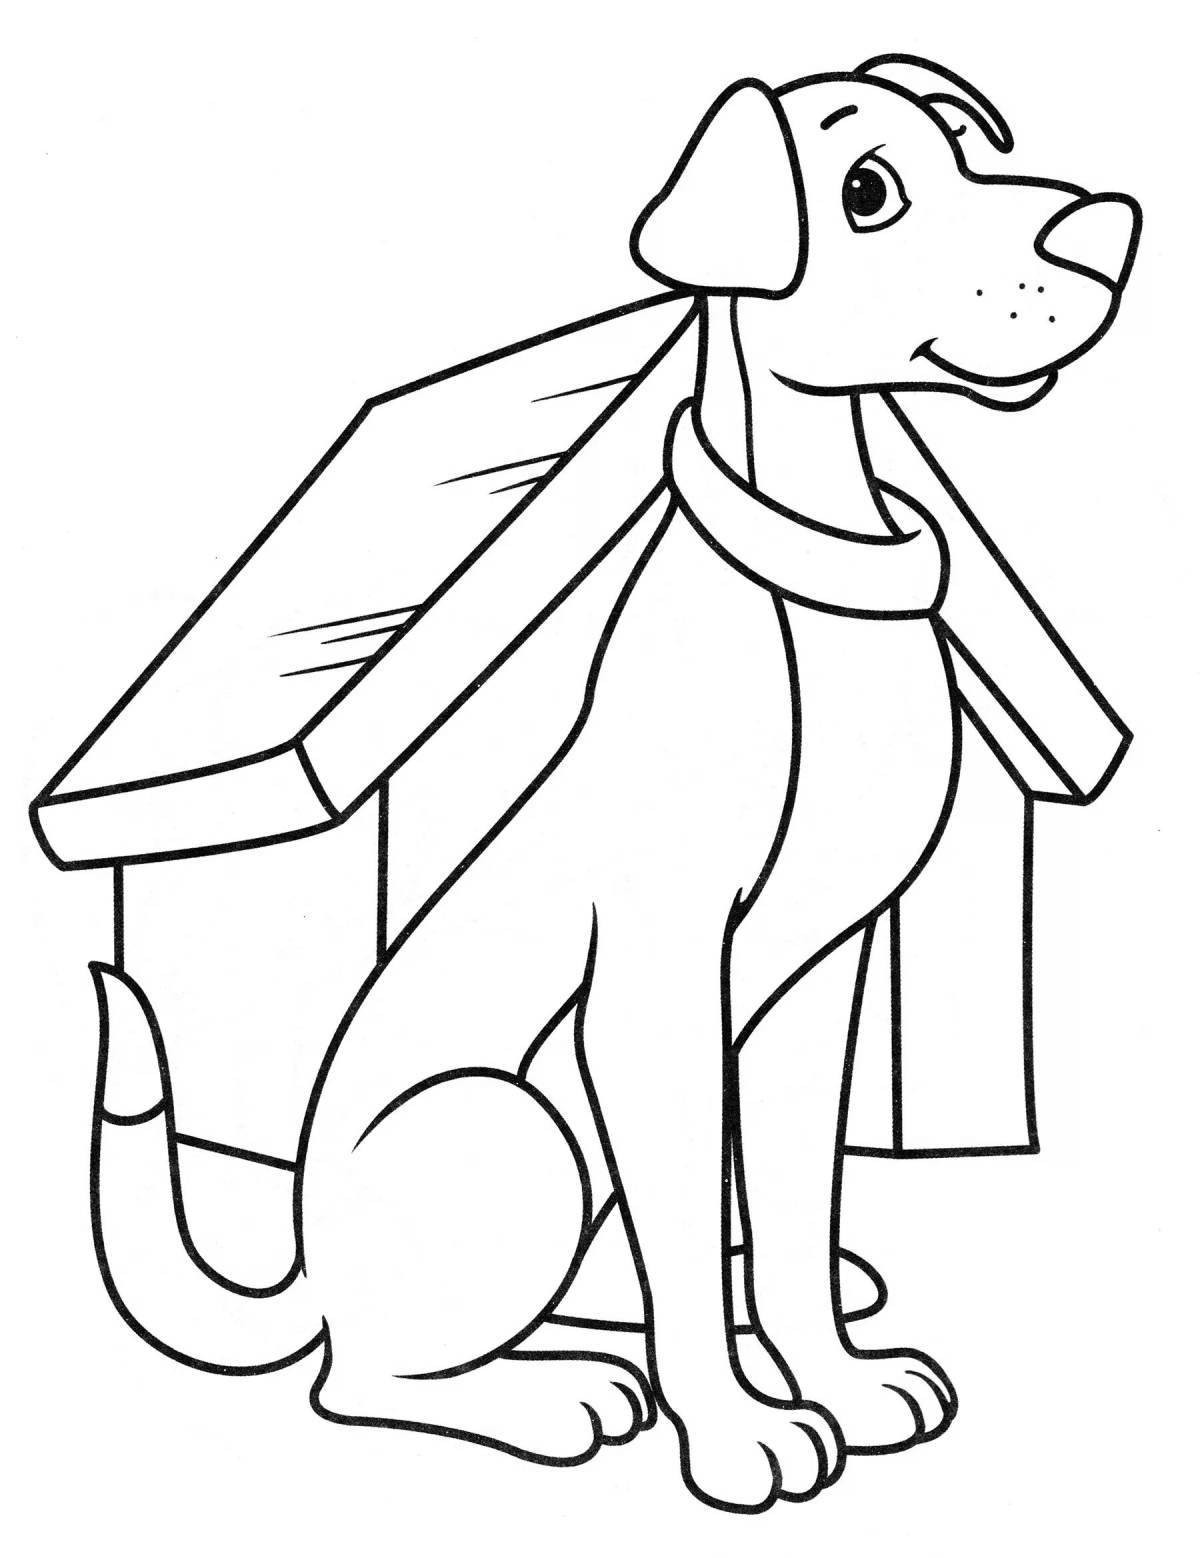 Fancy doghouse coloring page